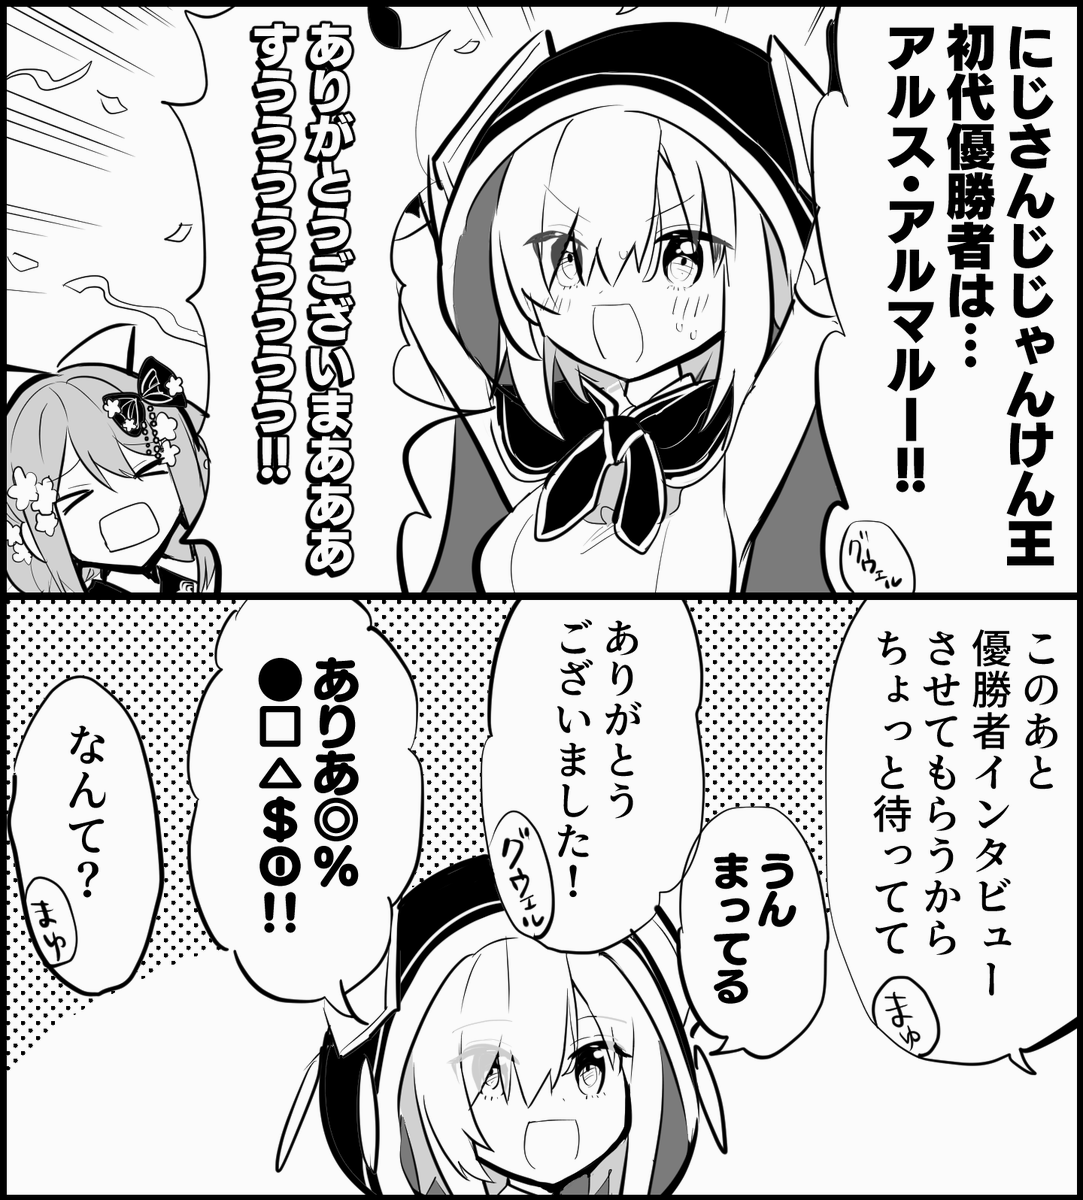 pixivに移植中です!

【切り抜き漫画】モチモチ語(感謝の言葉編) | 日辻ひこ #pixiv https://t.co/XE4s3wPZFv 